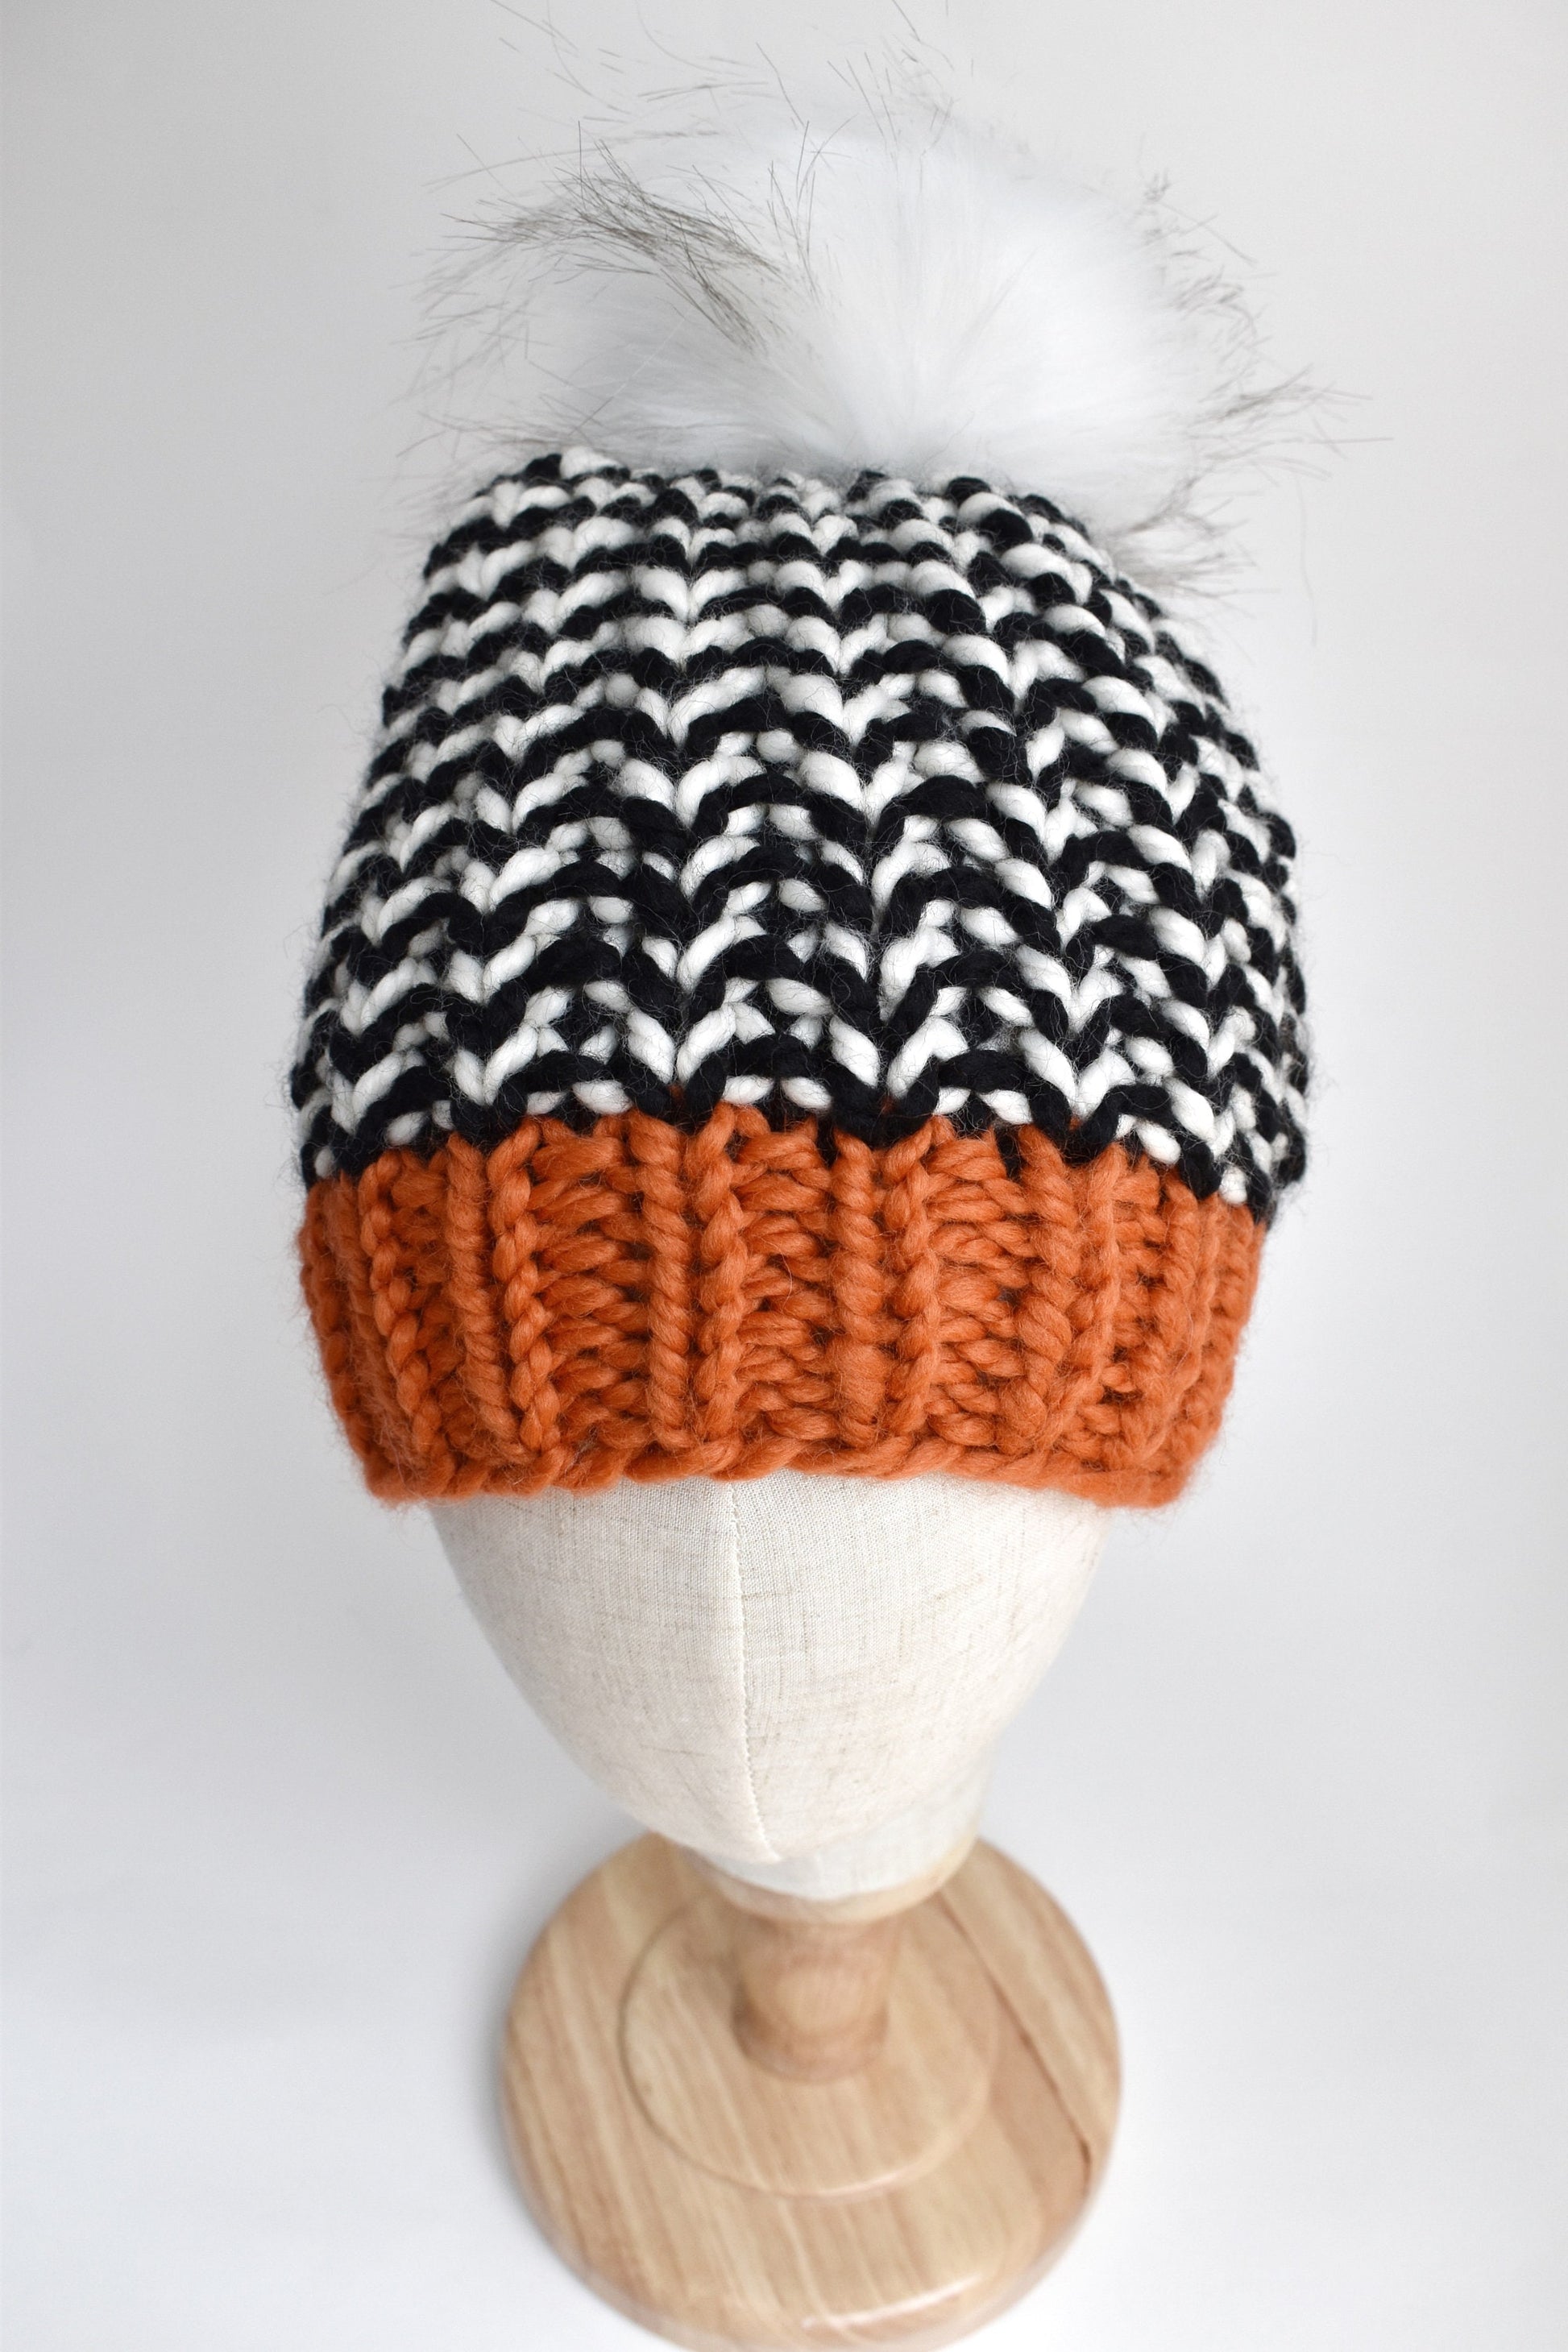 How to Attach Faux Fur Poms to Knit and Crochet Beanies. 